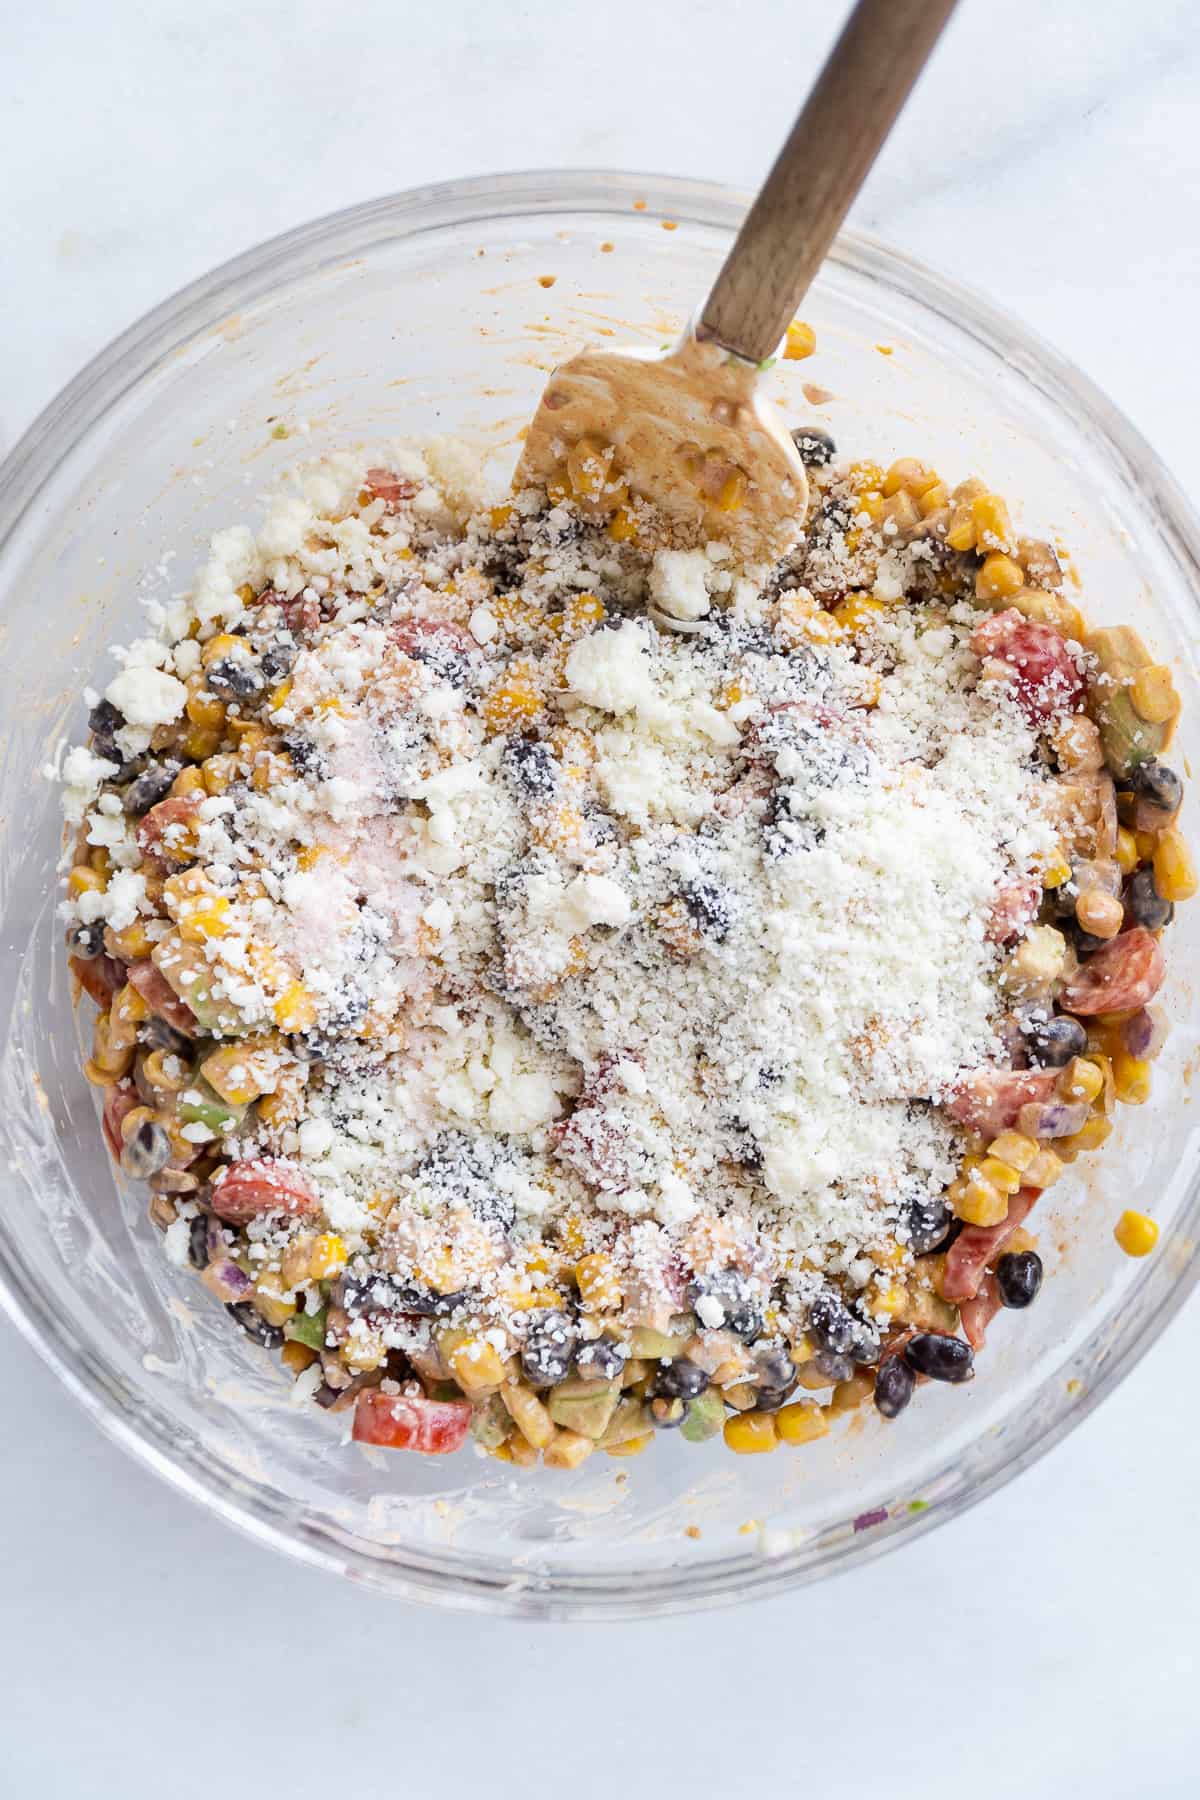 Overhead view of corn salad with cotija cheese sprinkled on top about to be mixed in.